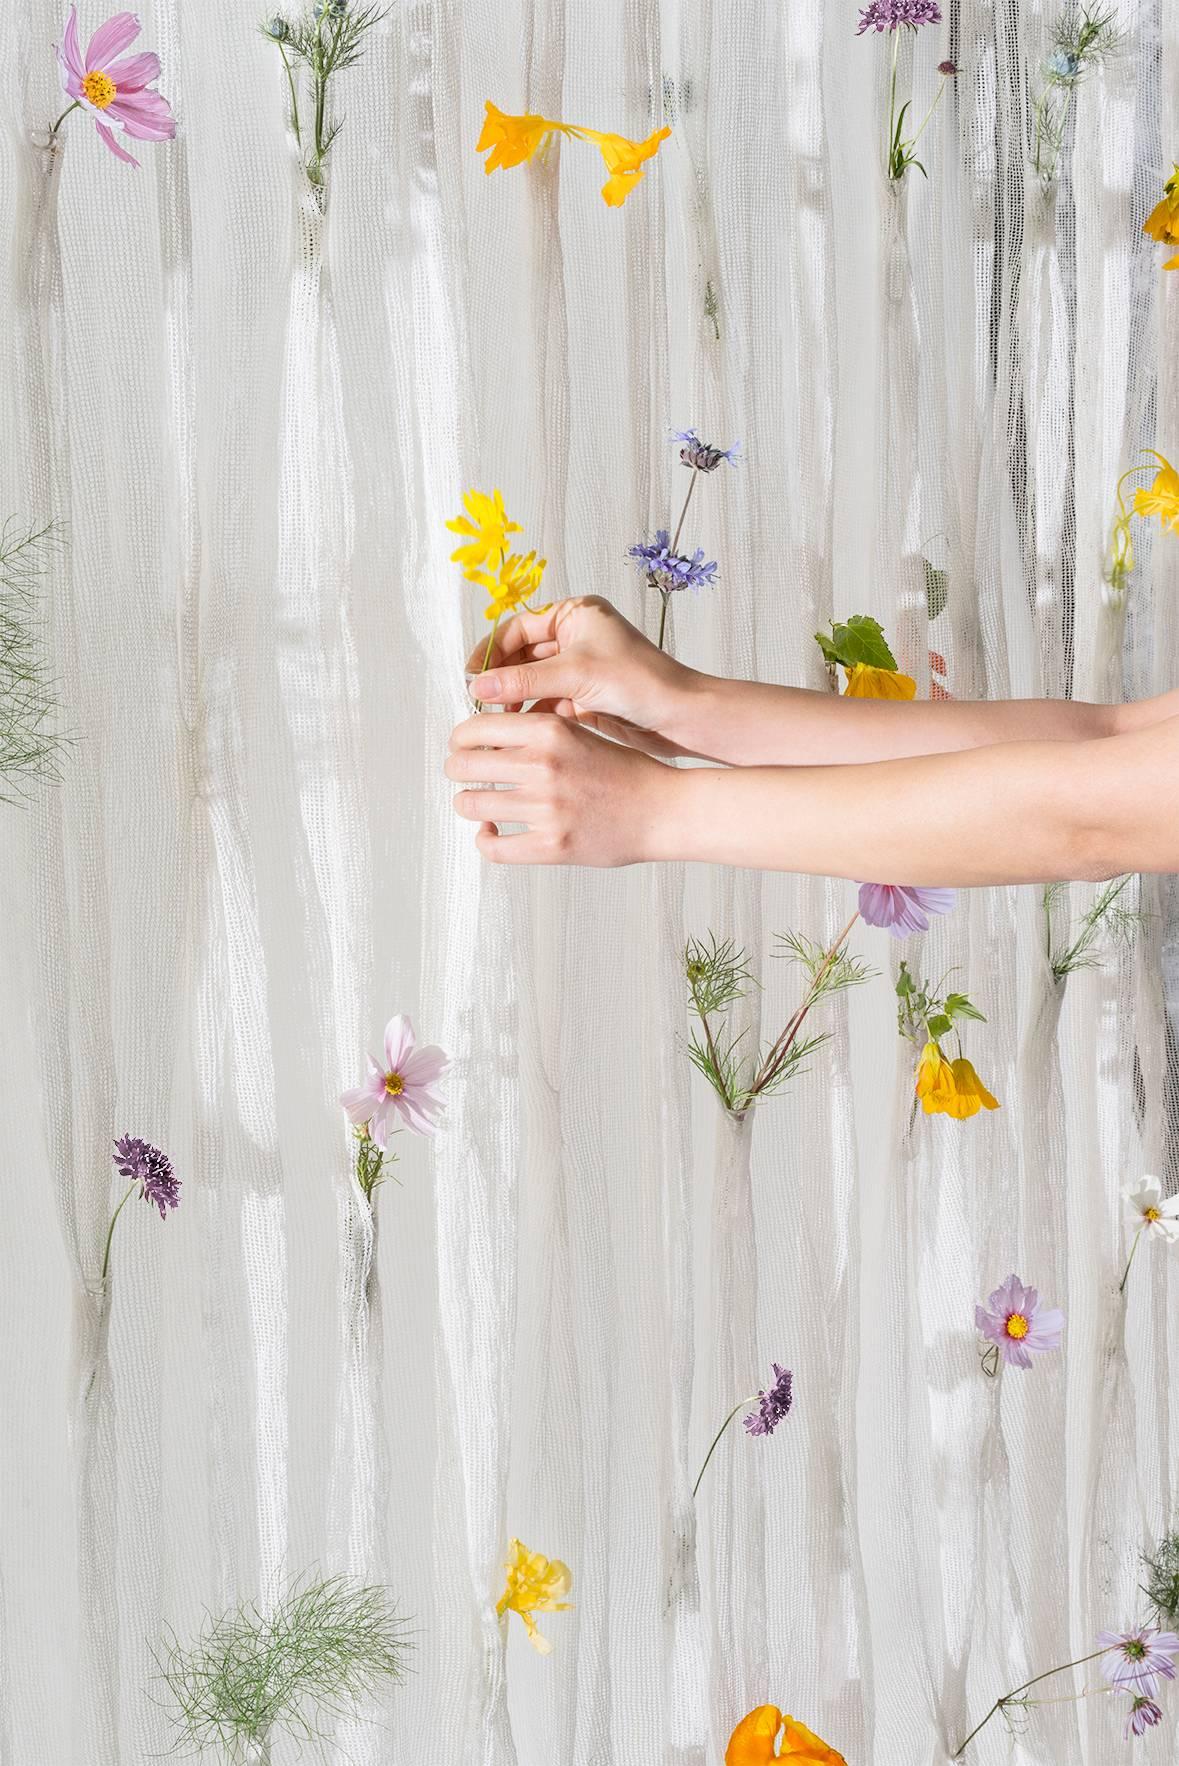 Japanese Draped Flowers, Paper Thread Curtain to Hold Fresh Flowers by UMÉ Studio For Sale